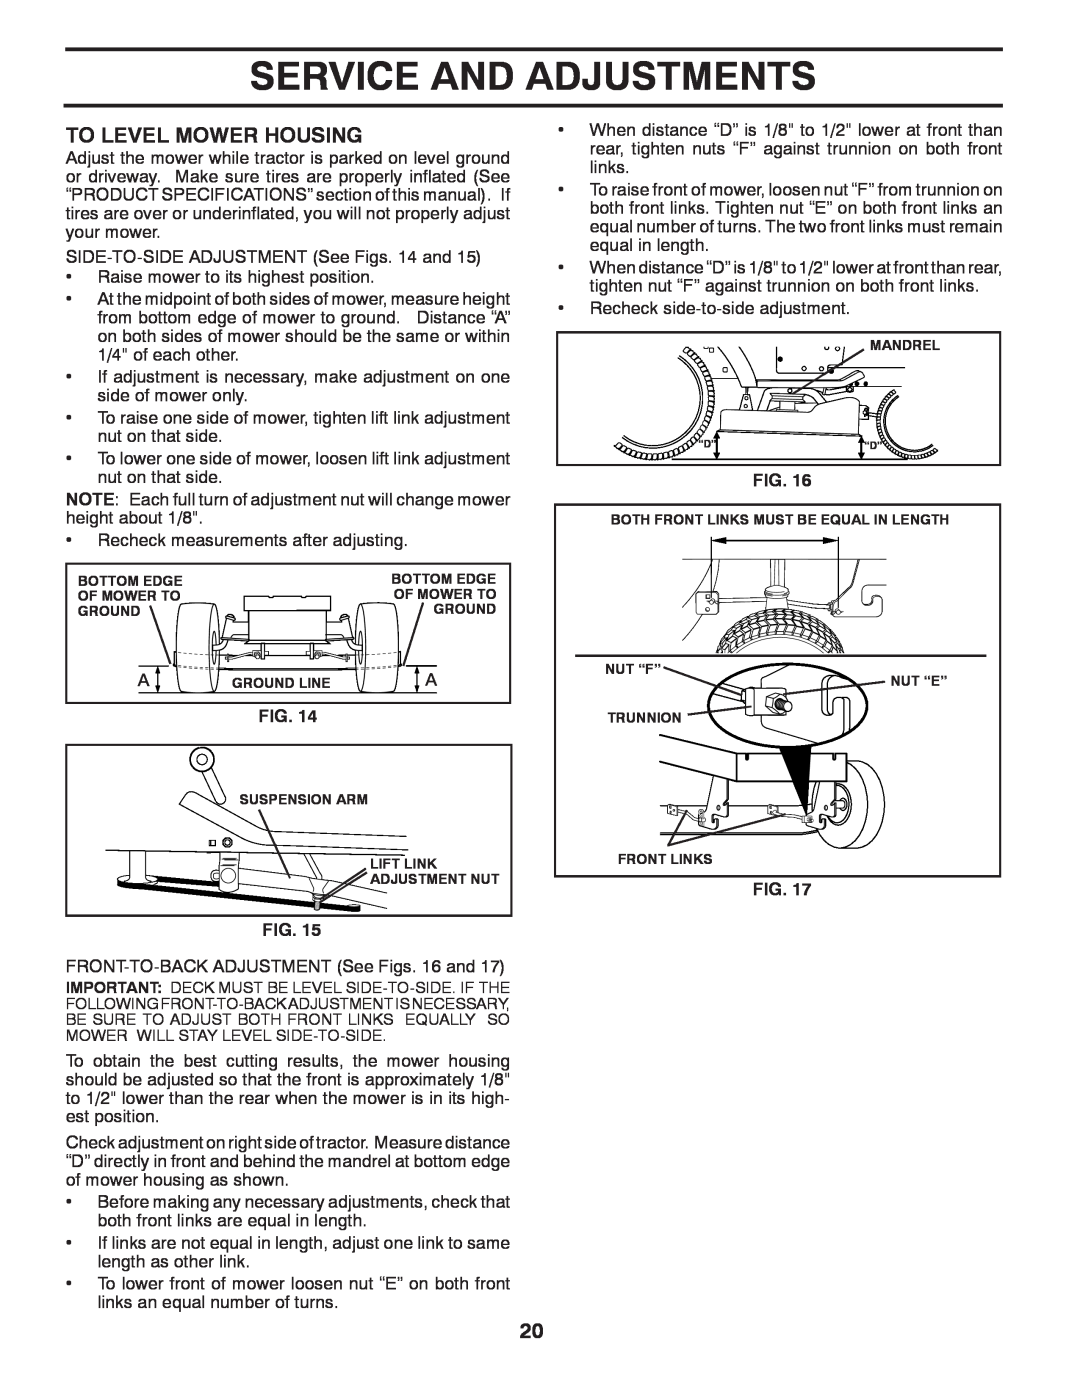 Poulan 425179 manual To Level Mower Housing, Service And Adjustments 